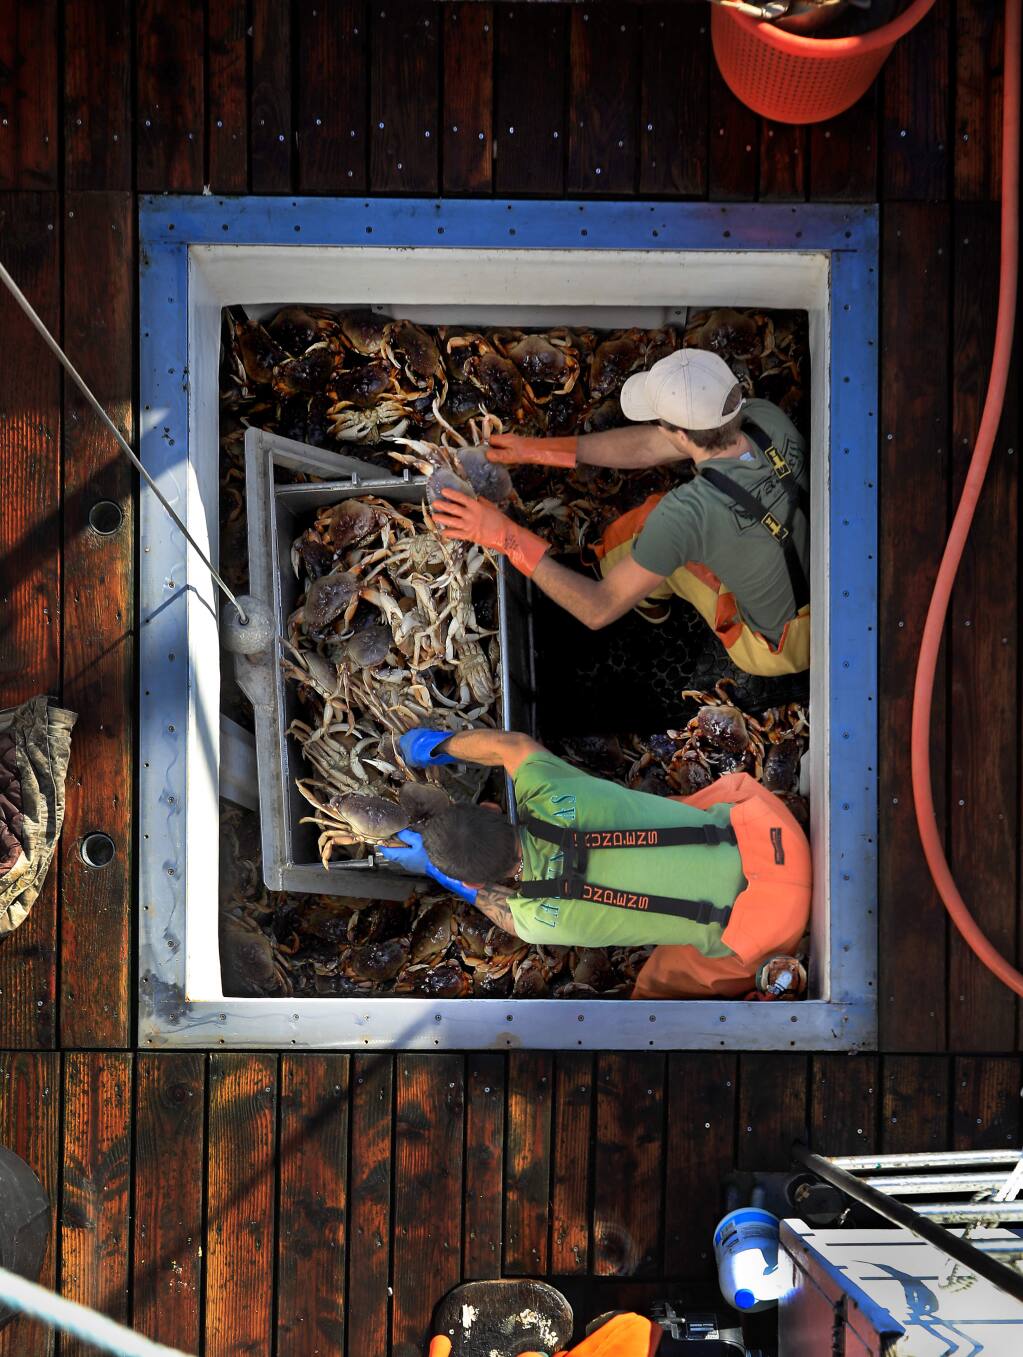 Tim Bentley, top, and Martin Blaney offload Dungeness crab from the hold of the Seastar at Spud Point Marina, Monday, Dec. 30, 2019 in Bodega Bay. (Kent Porter / The Press Democrat) 2019